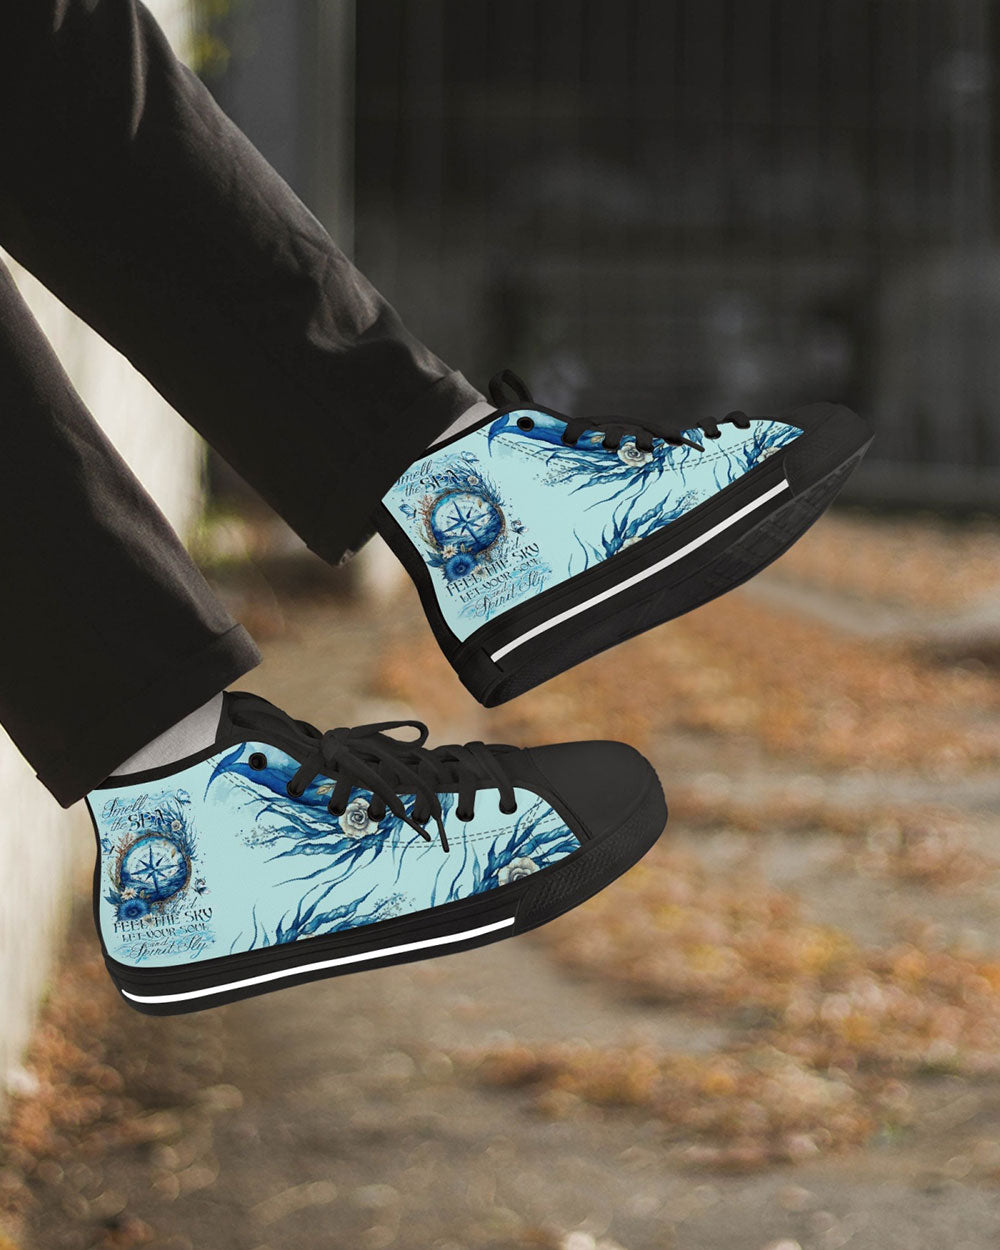 SMELL THE SEA AND FEEL THE SKY HIGH TOP CANVAS SHOES - TY2305234